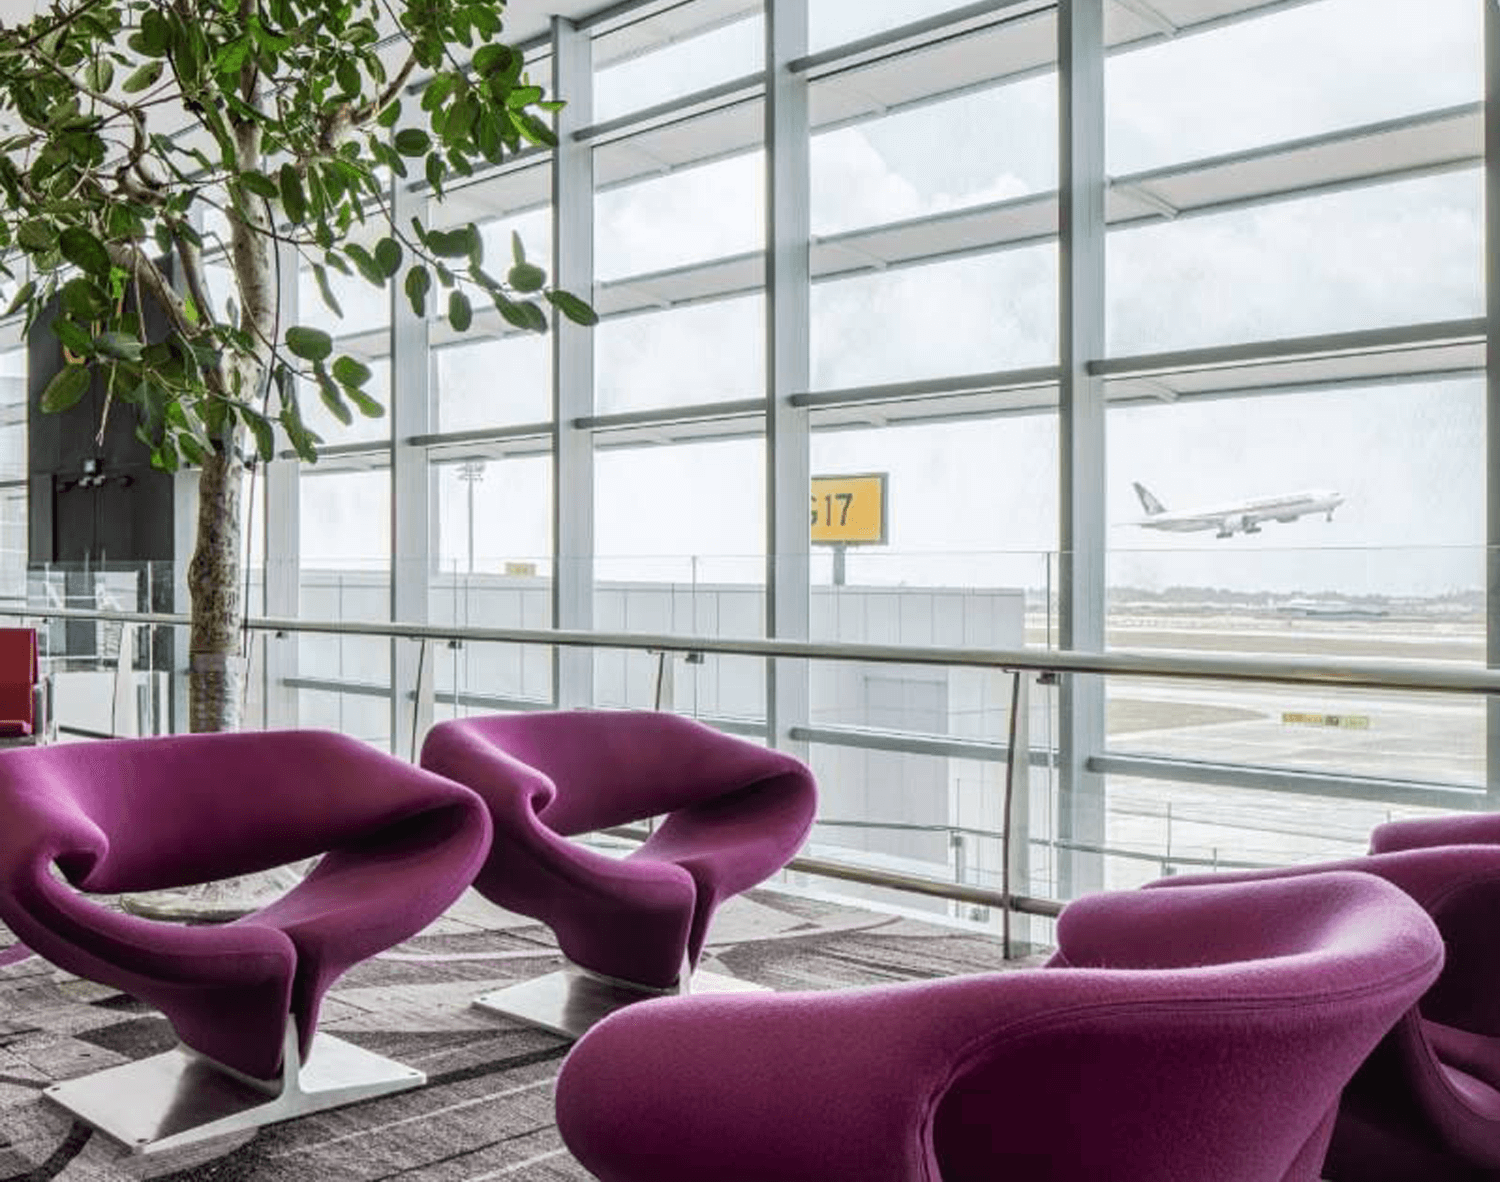 Three key airport trends you need to know